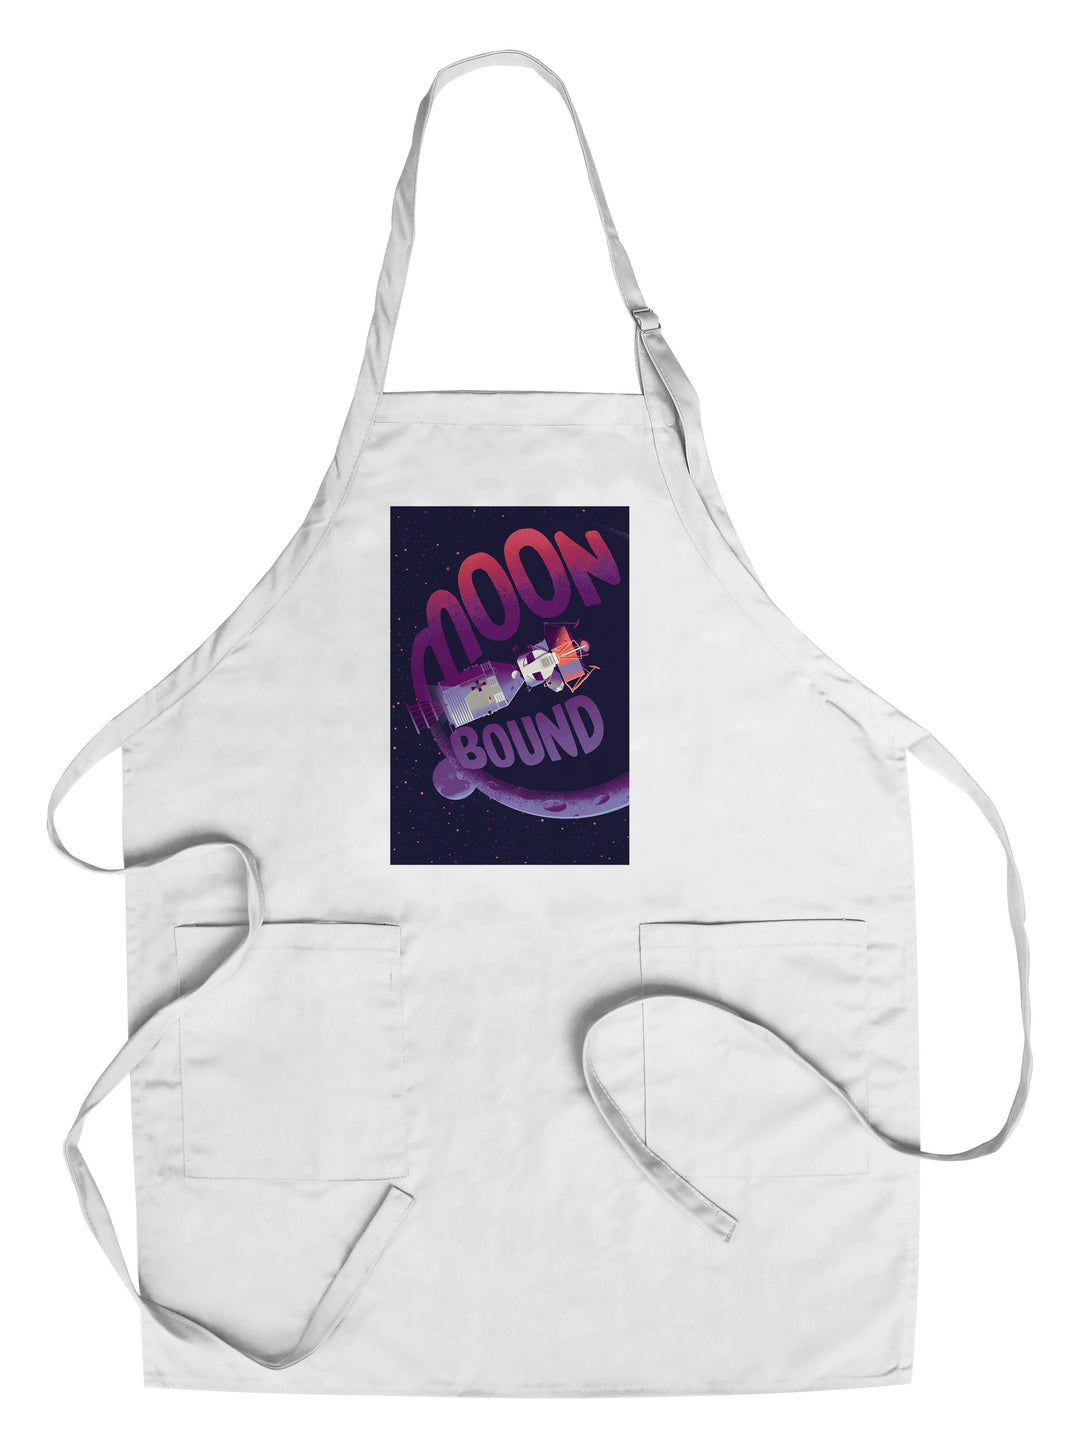 Spacethusiasm Collection, Apollo, Moon Bound, Towels and Aprons Kitchen Lantern Press Chef's Apron 